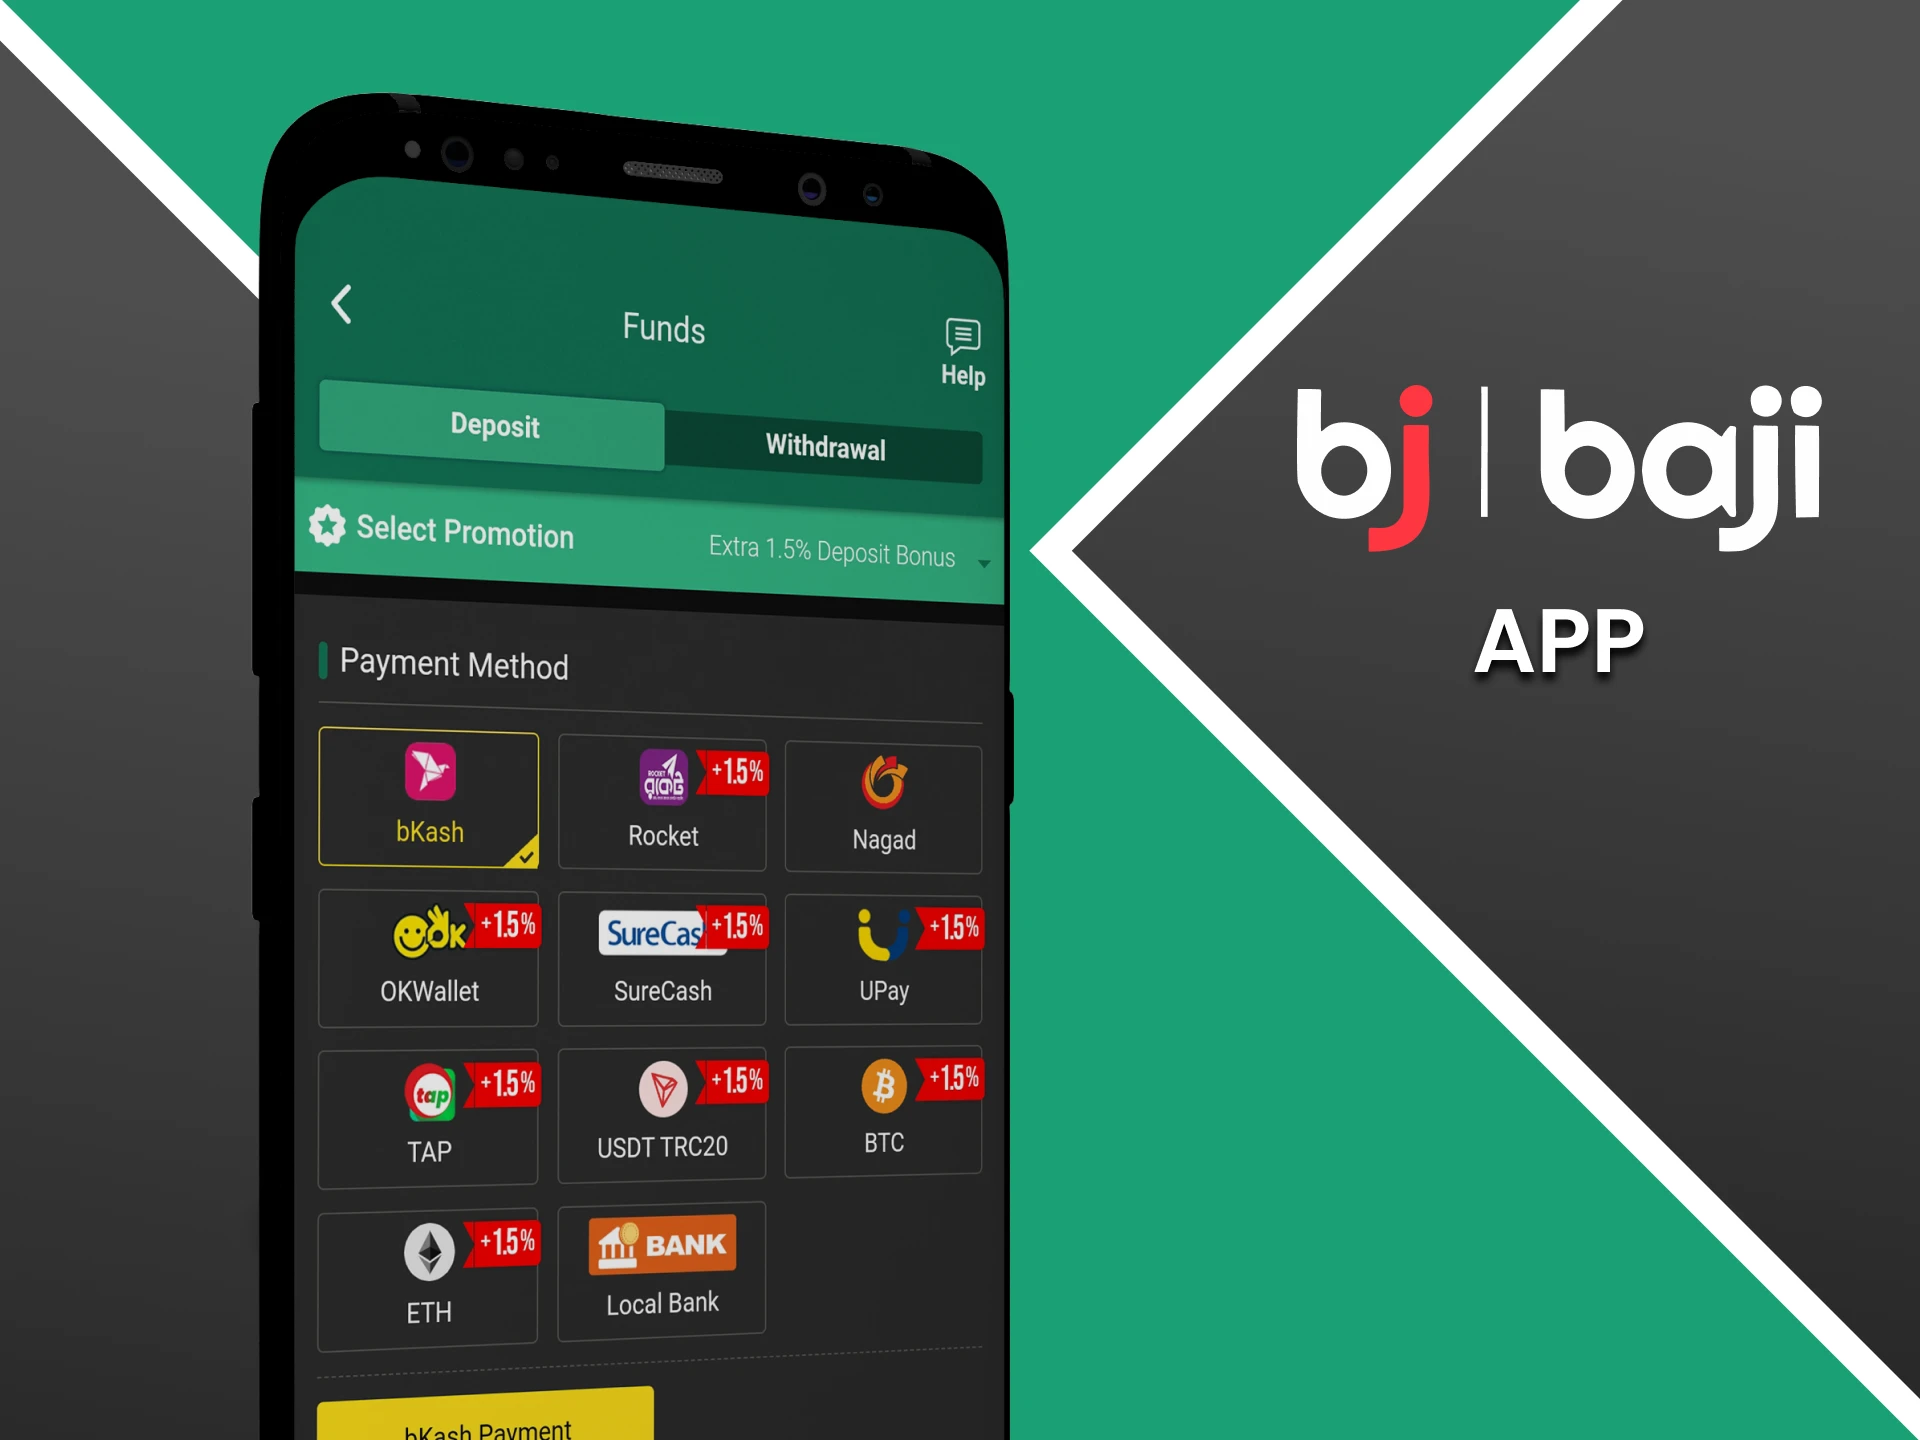 You can top up your deposit through the Baji app.